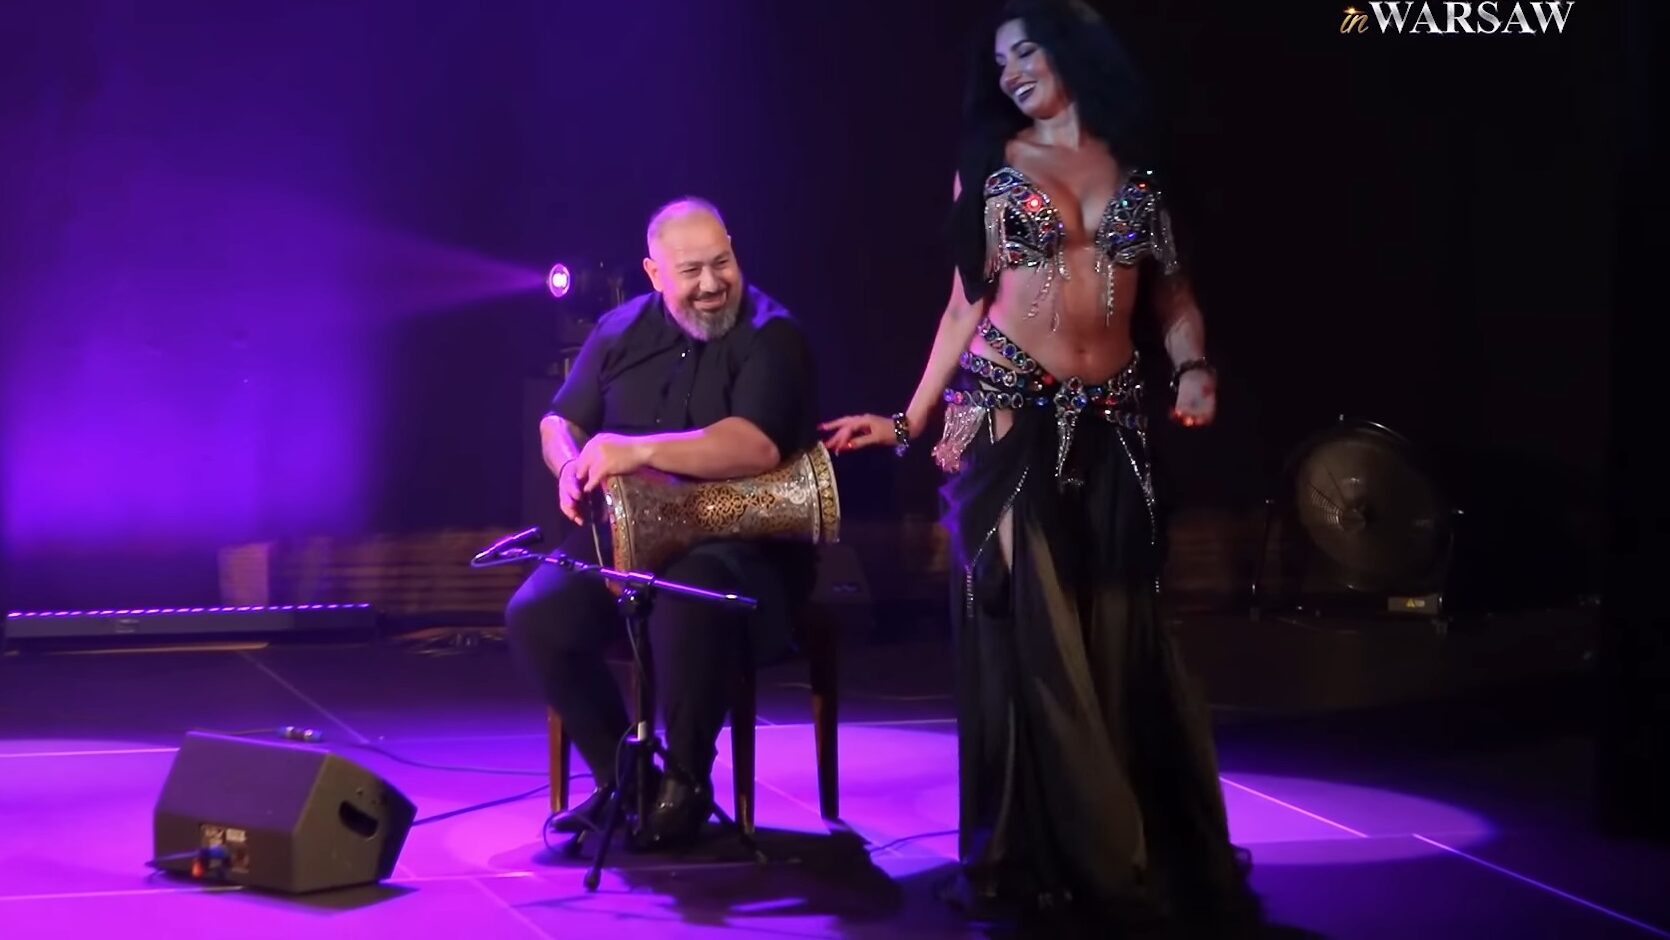 A belly dancer woman and a drum solo musician on stage smiling at each other